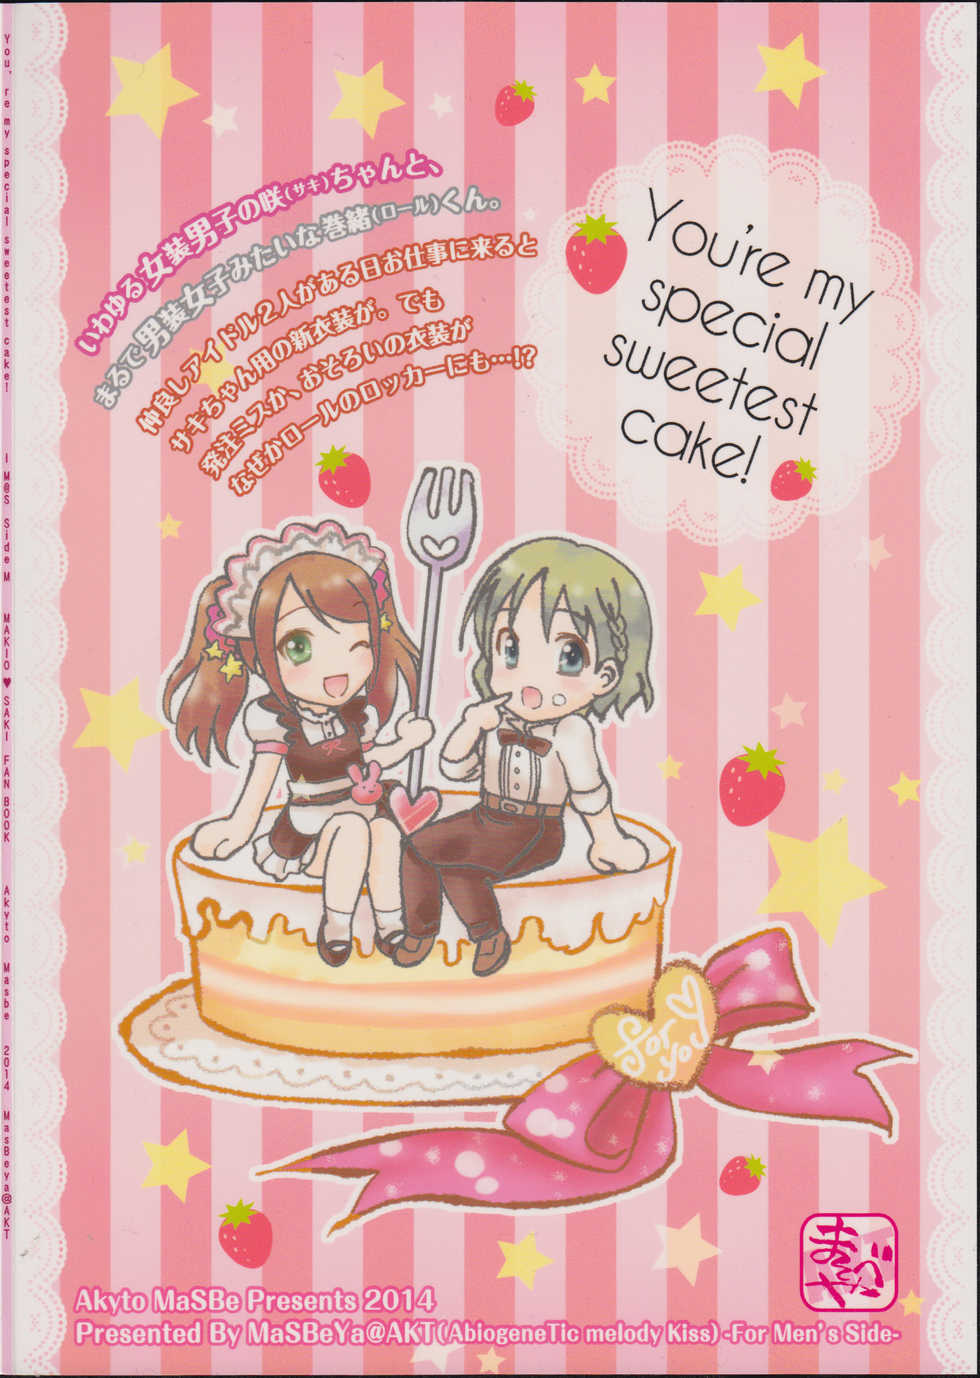 (C87) [MaSBeYaAKT@AbiOgeneTic melodY Kiss (MaSBe Akyto)] You're my special sweetest cake! (THE IDOLM@STER SideM) - Page 22